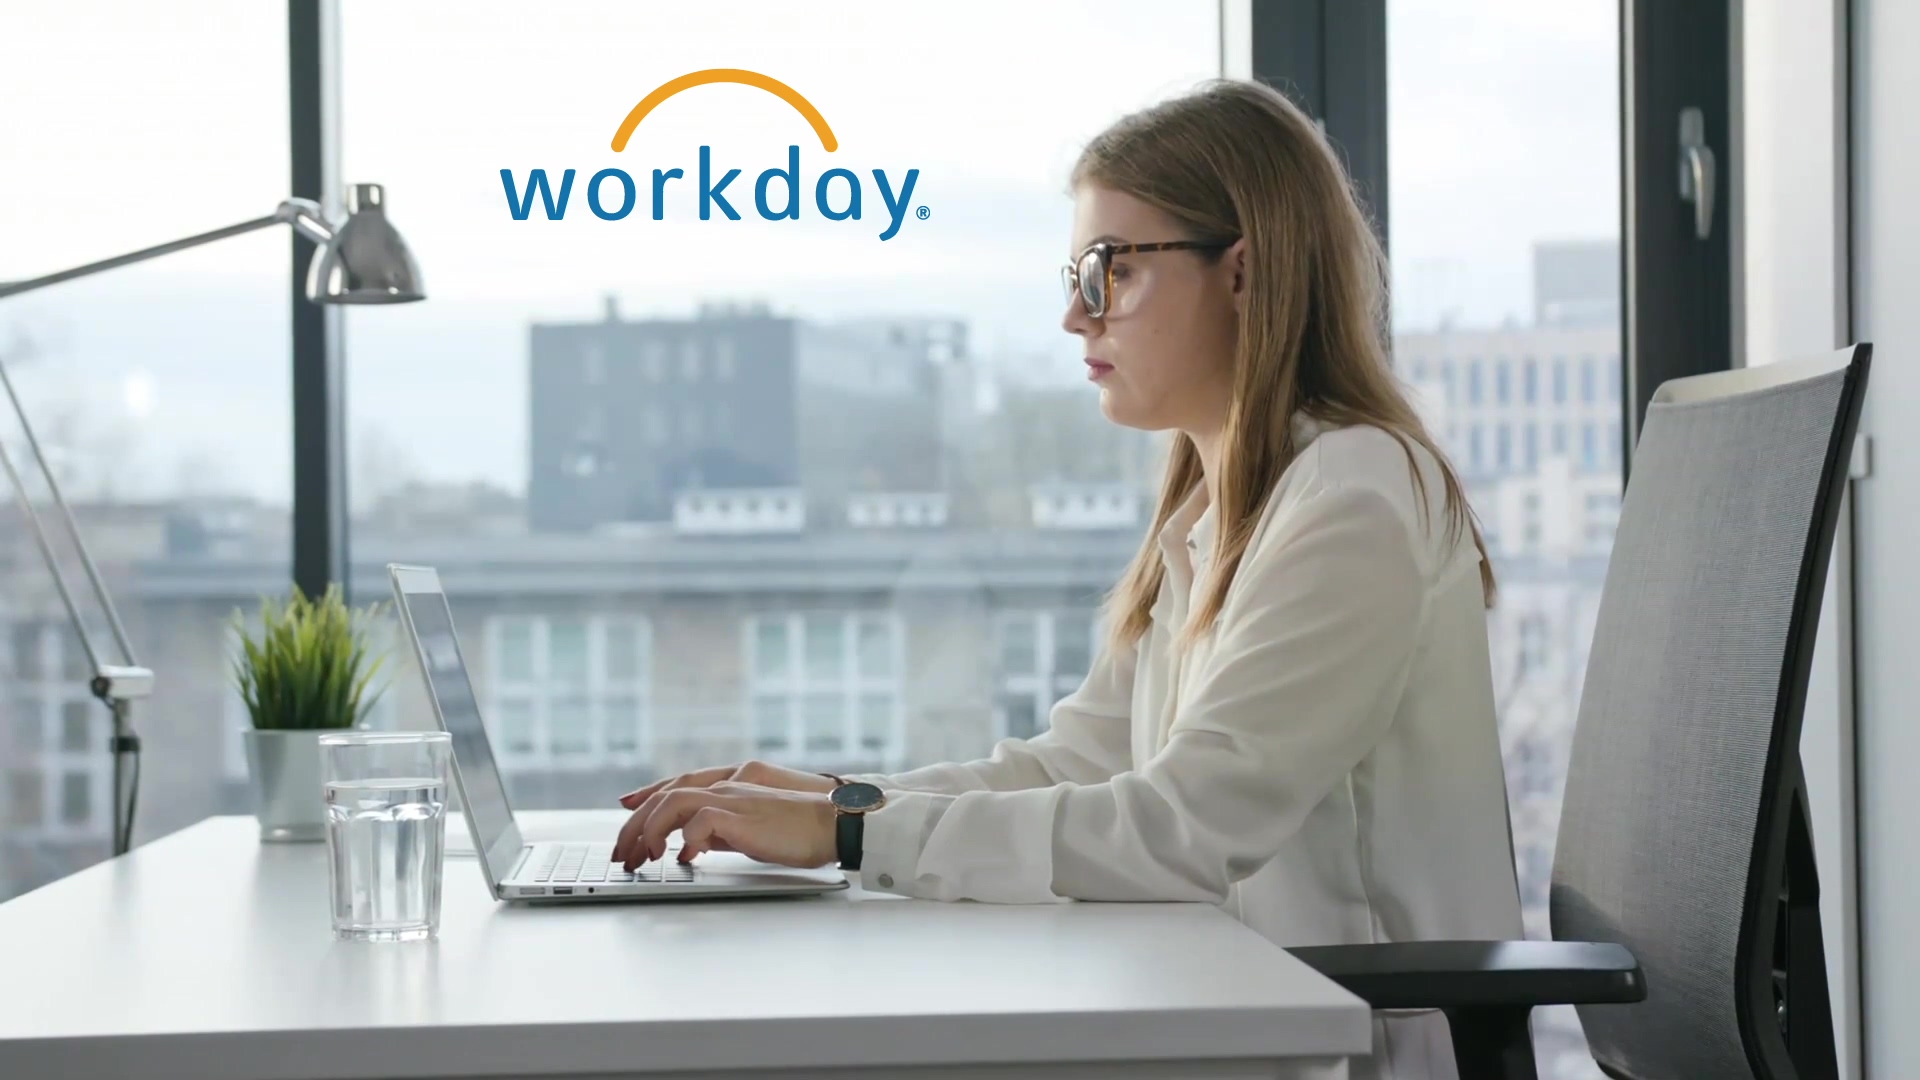 Workday Video